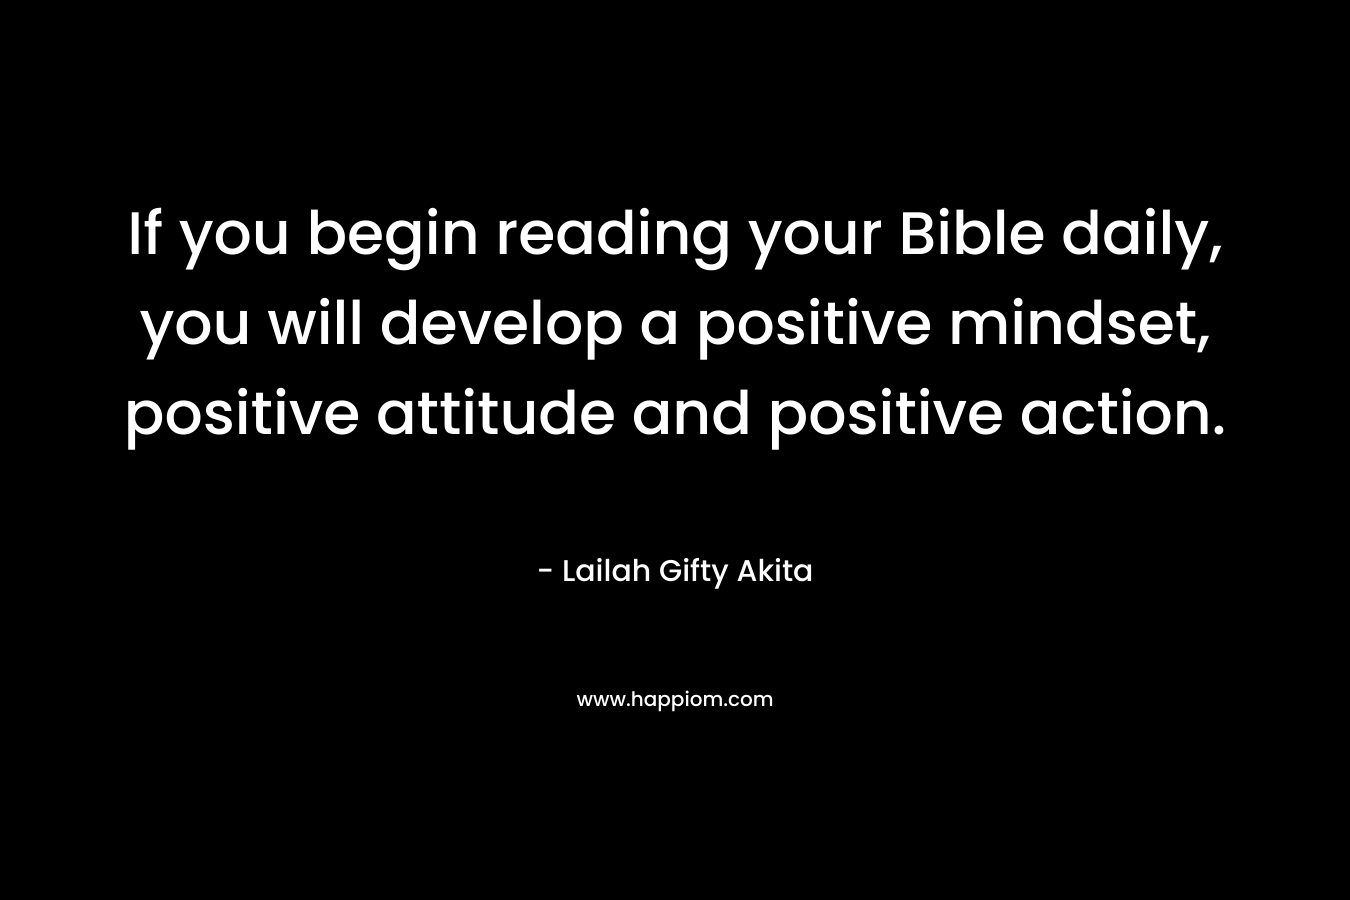 If you begin reading your Bible daily, you will develop a positive mindset, positive attitude and positive action.